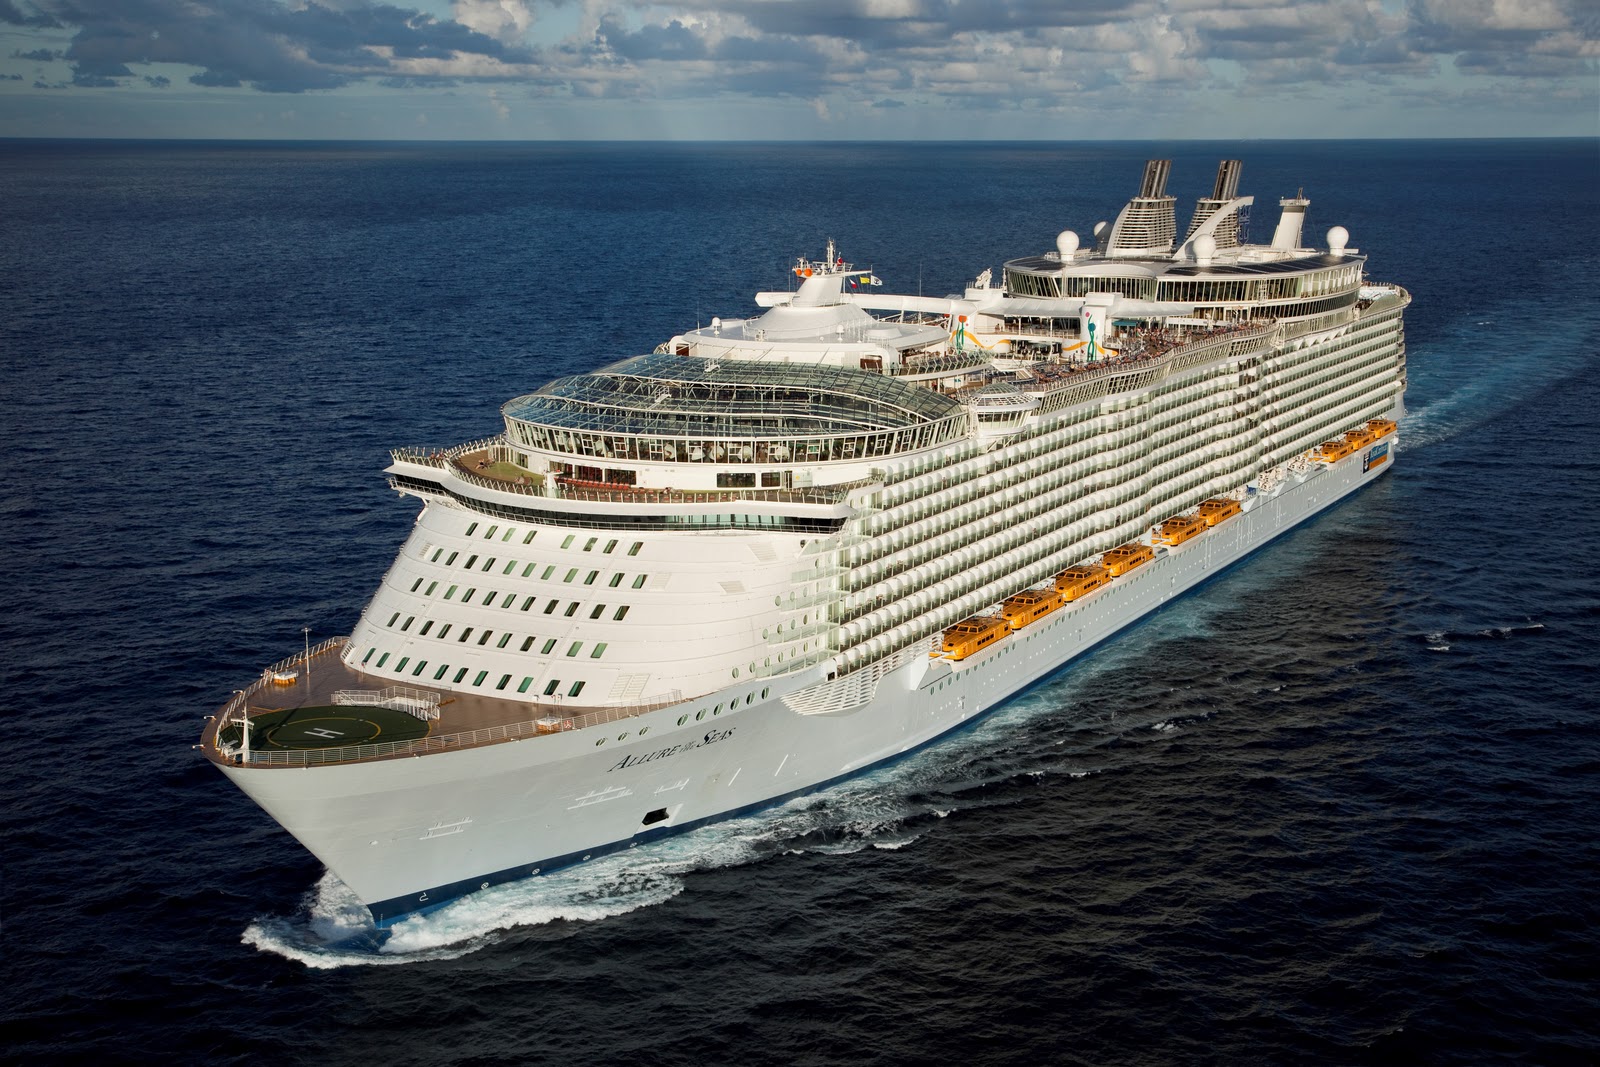 The Allure of the Seas. Royal Caribbean’s newest addition to their